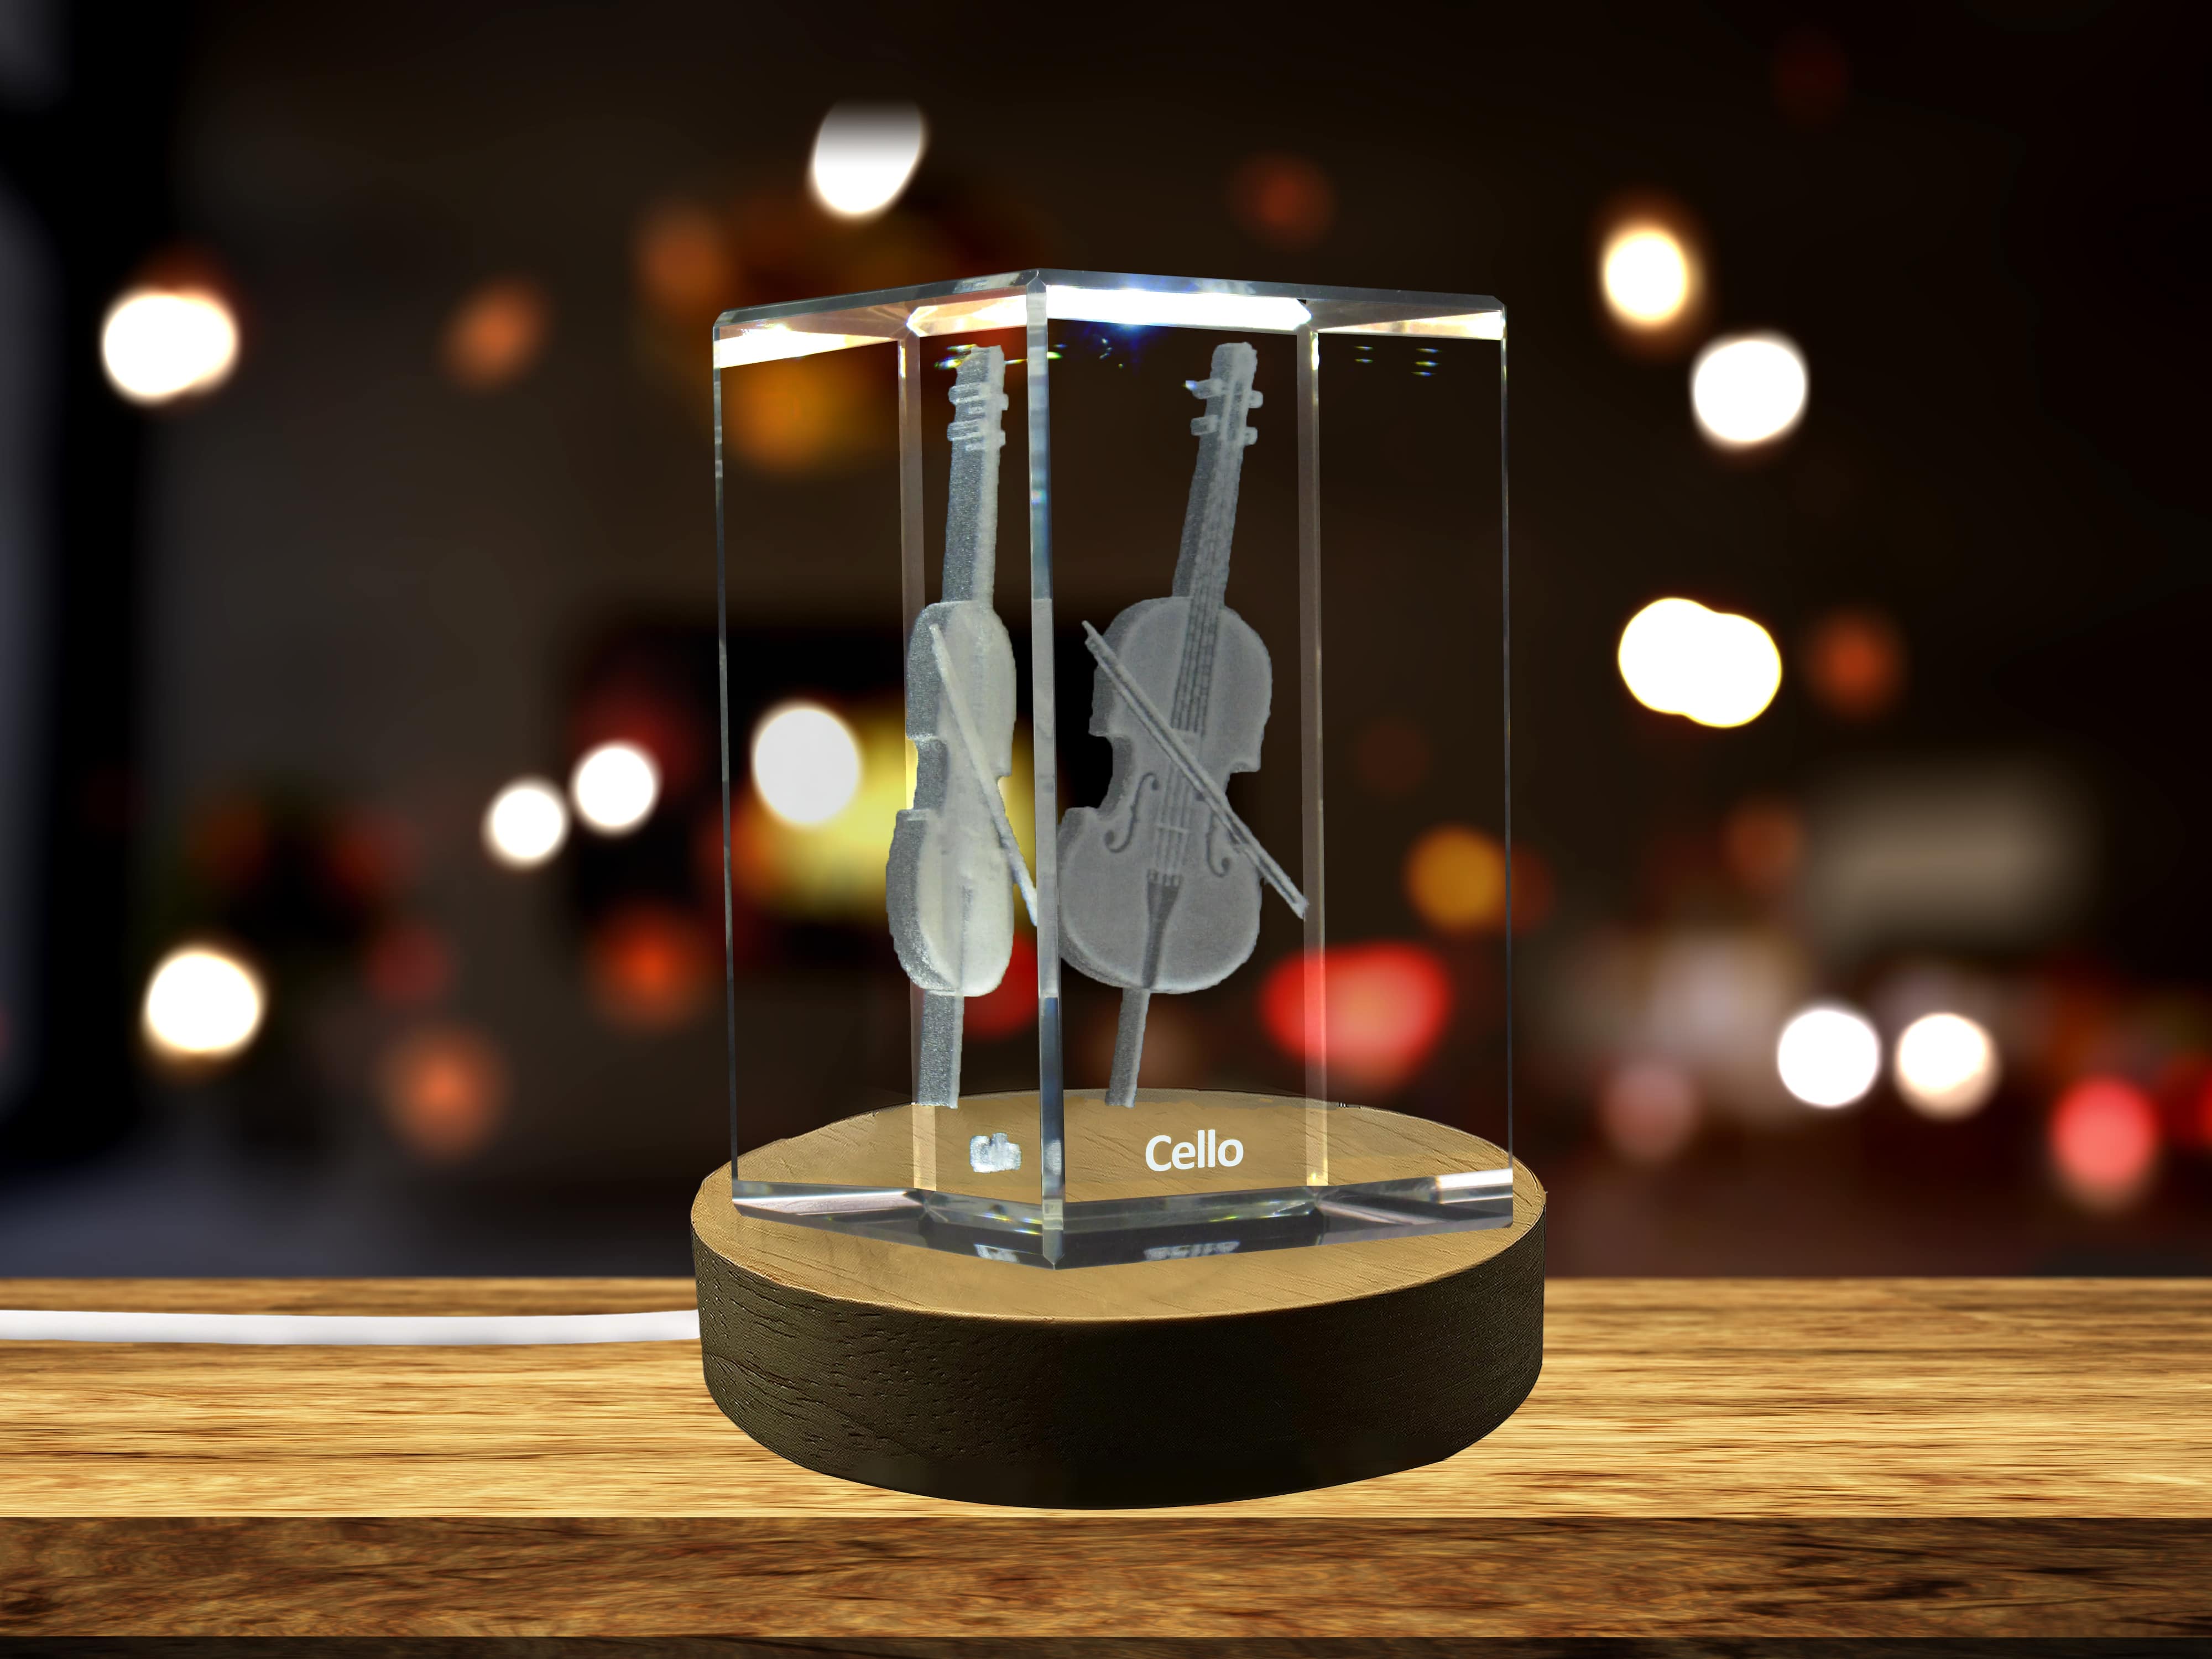 Cello 3D Engraved Crystal | Music 3D Engraved Crystal Keepsake A&B Crystal Collection